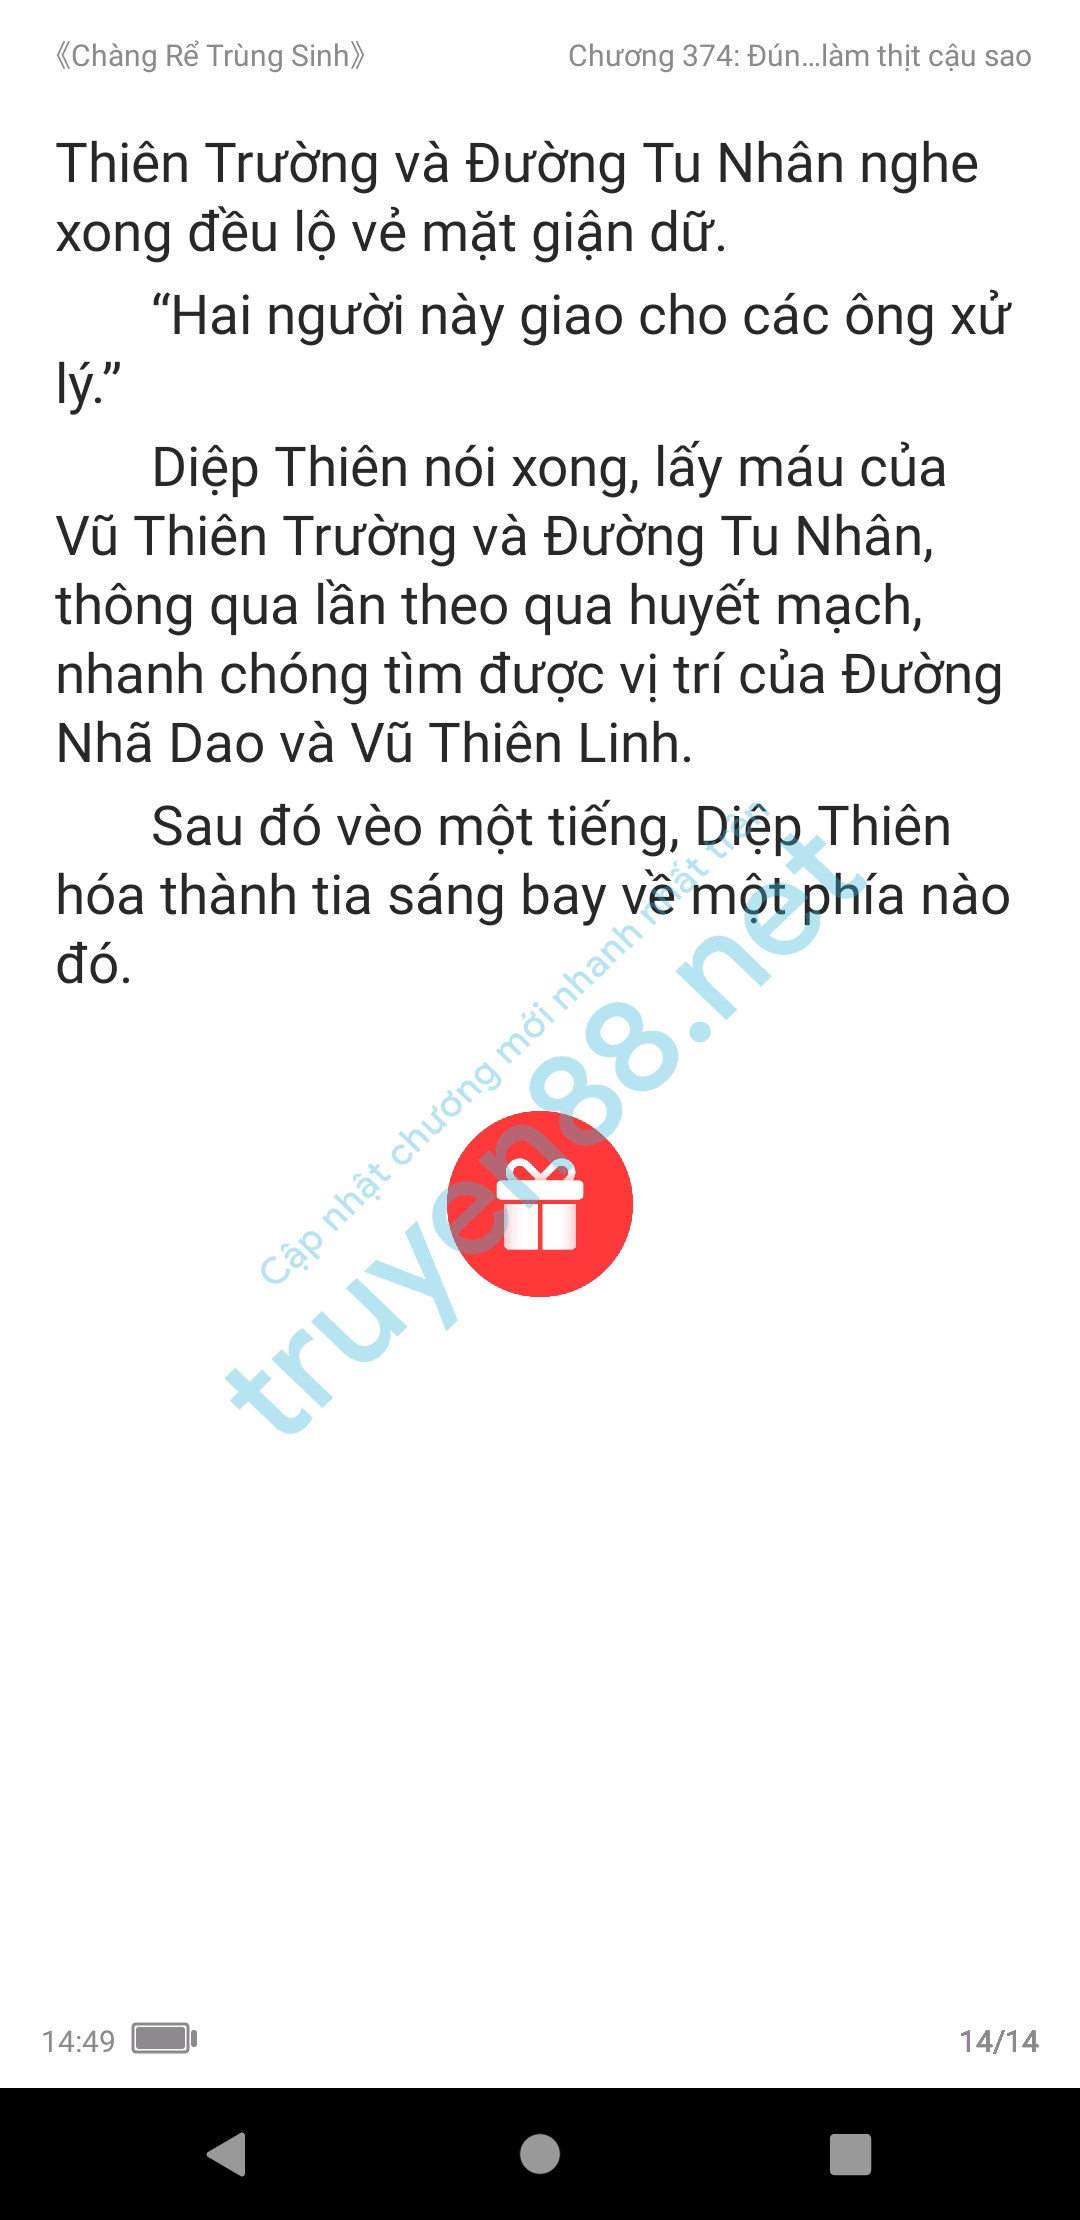 chang-re-trung-sinh-374-1